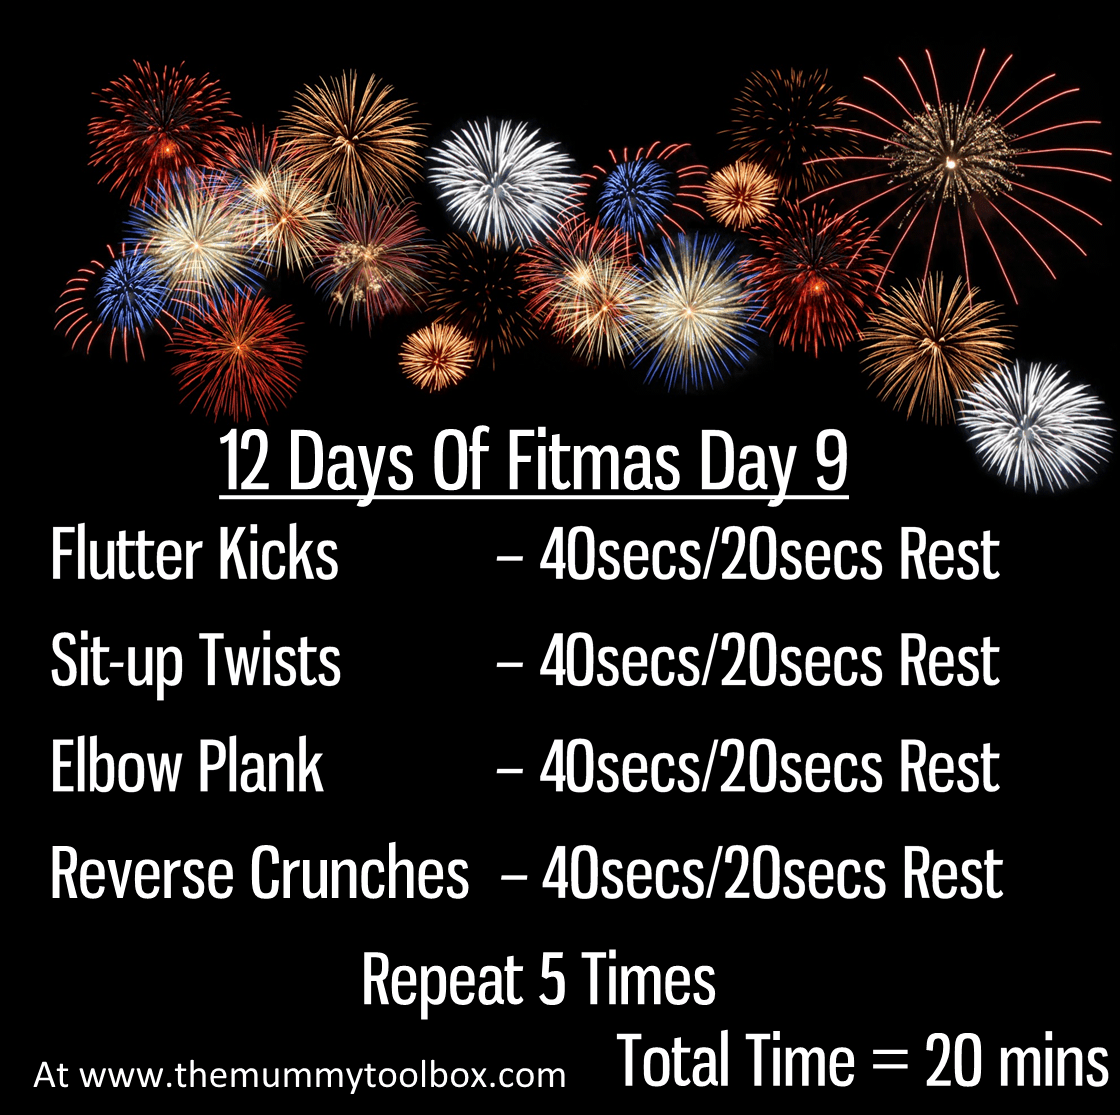 The 12 Days of Fitmas - Day 9